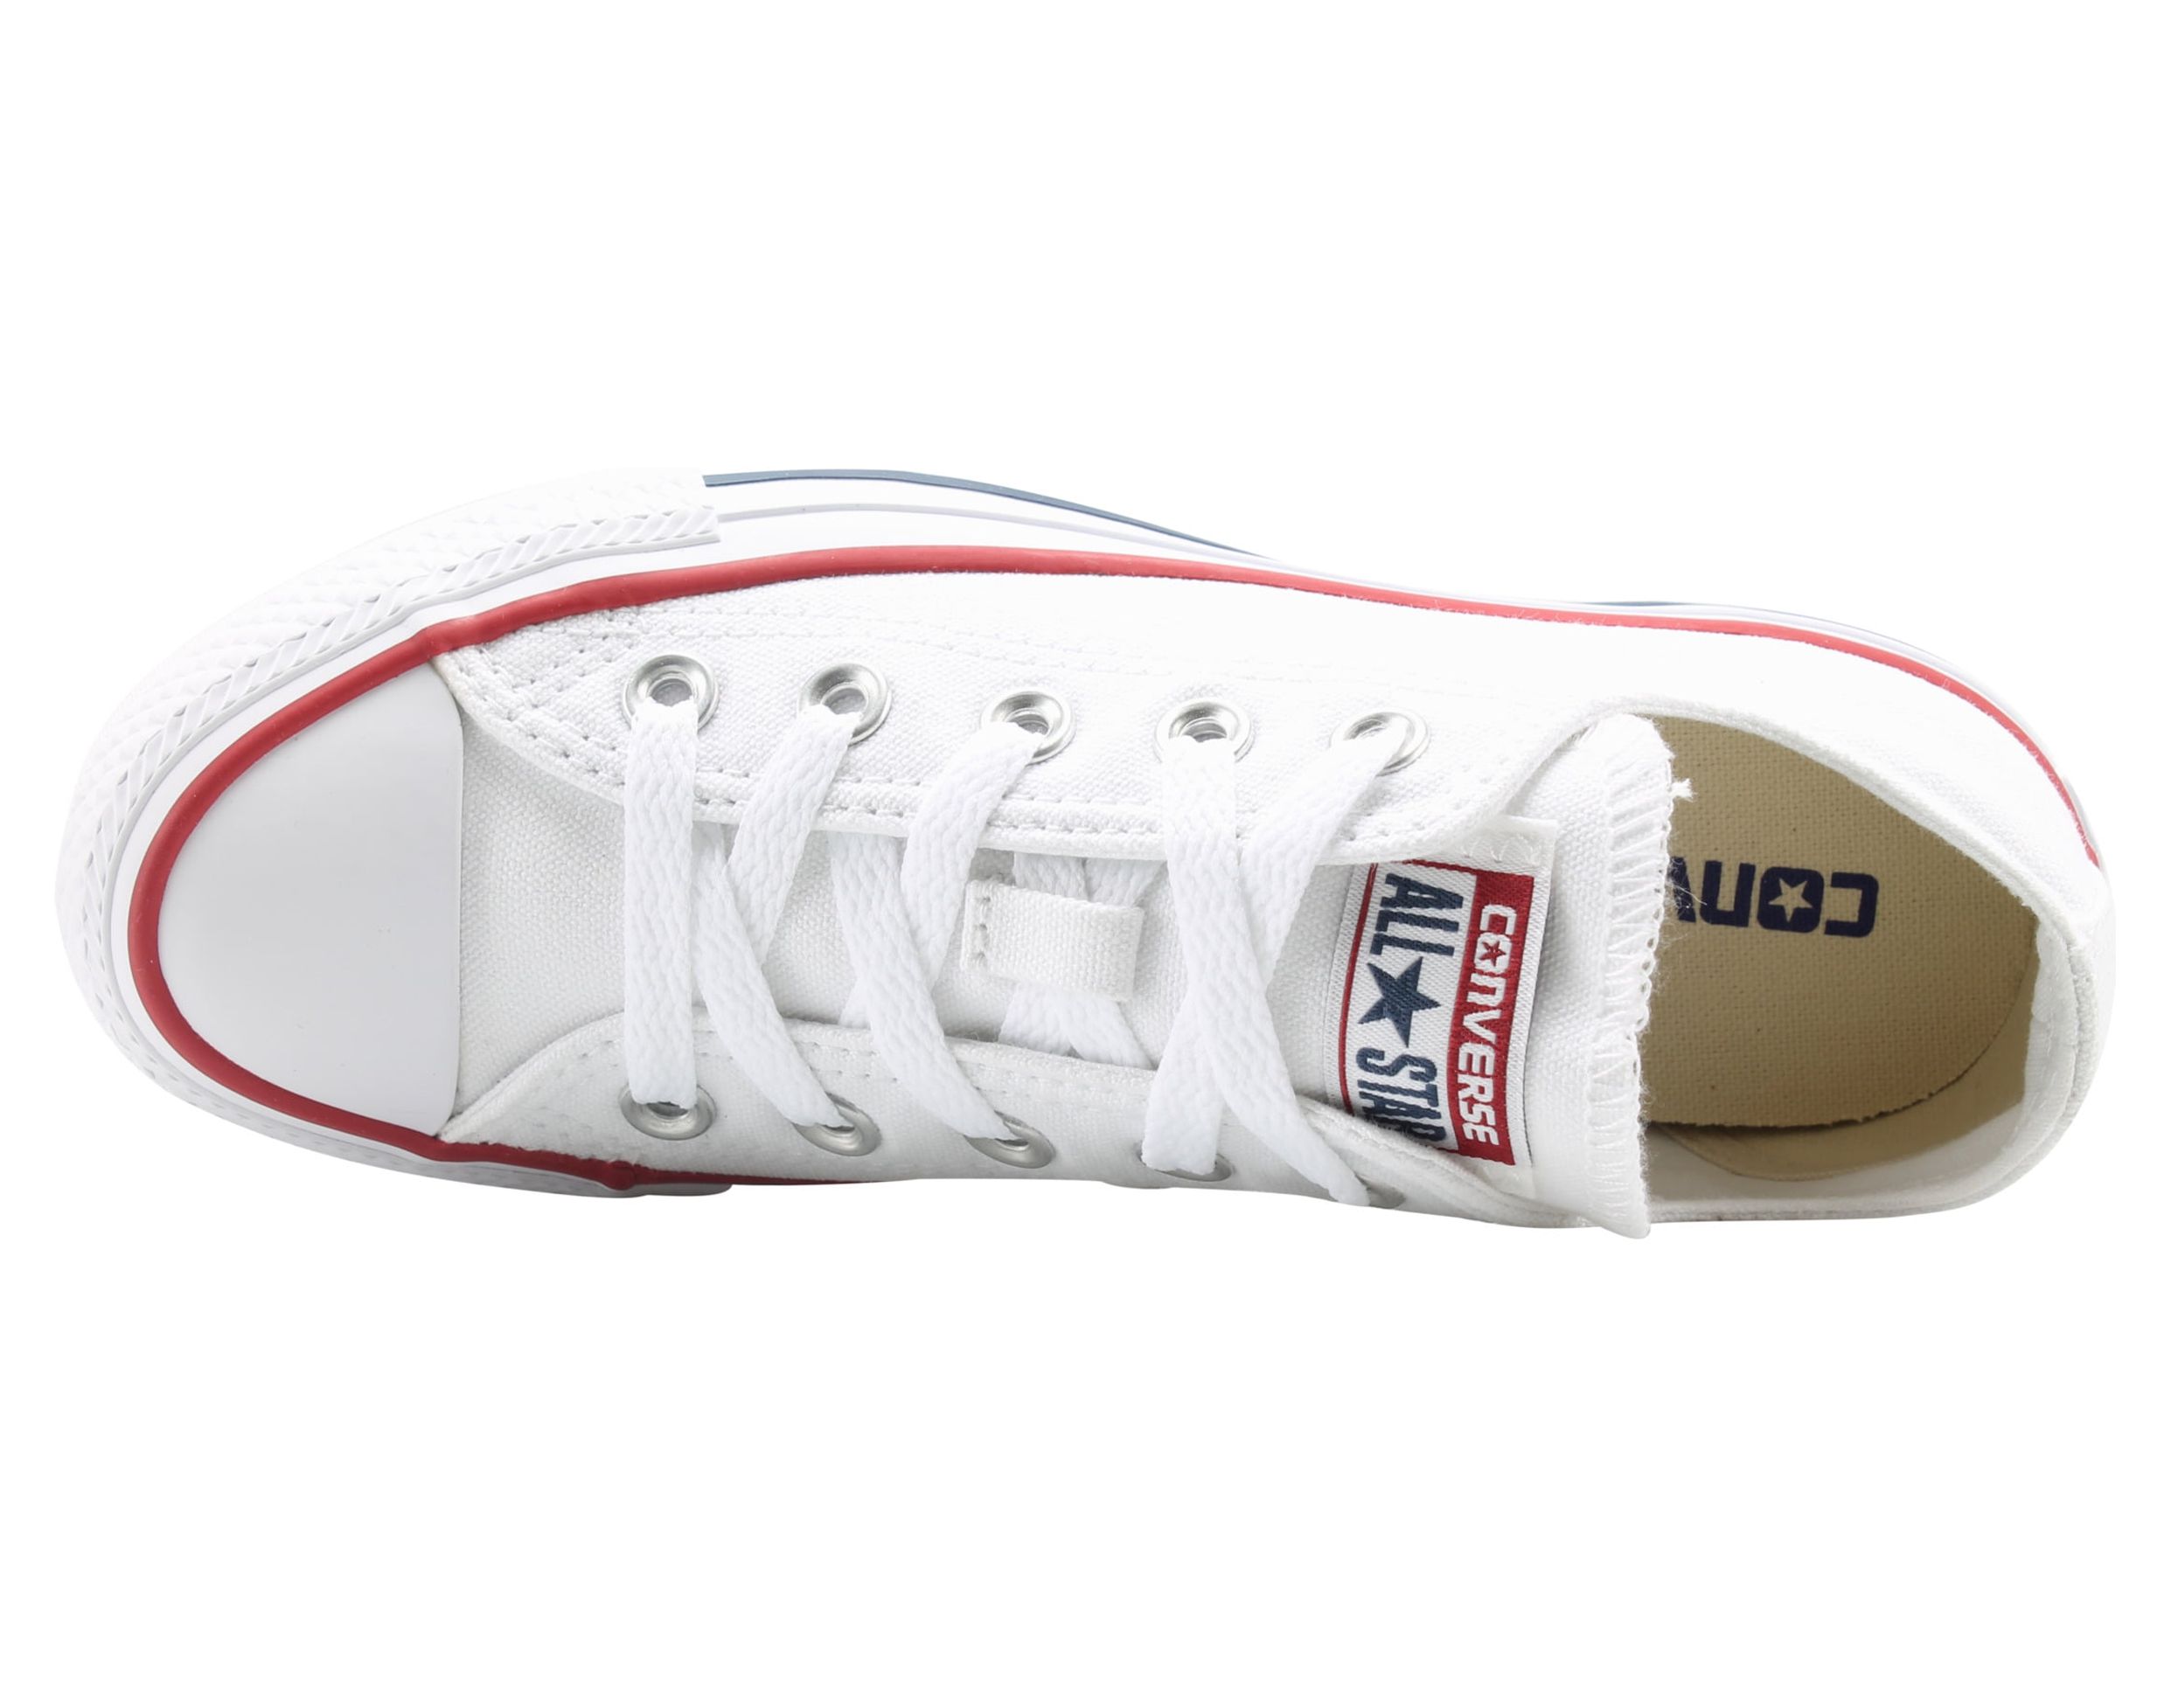 Converse M Converse Chuck Taylor All Star Ox M7652 - image 4 of 6